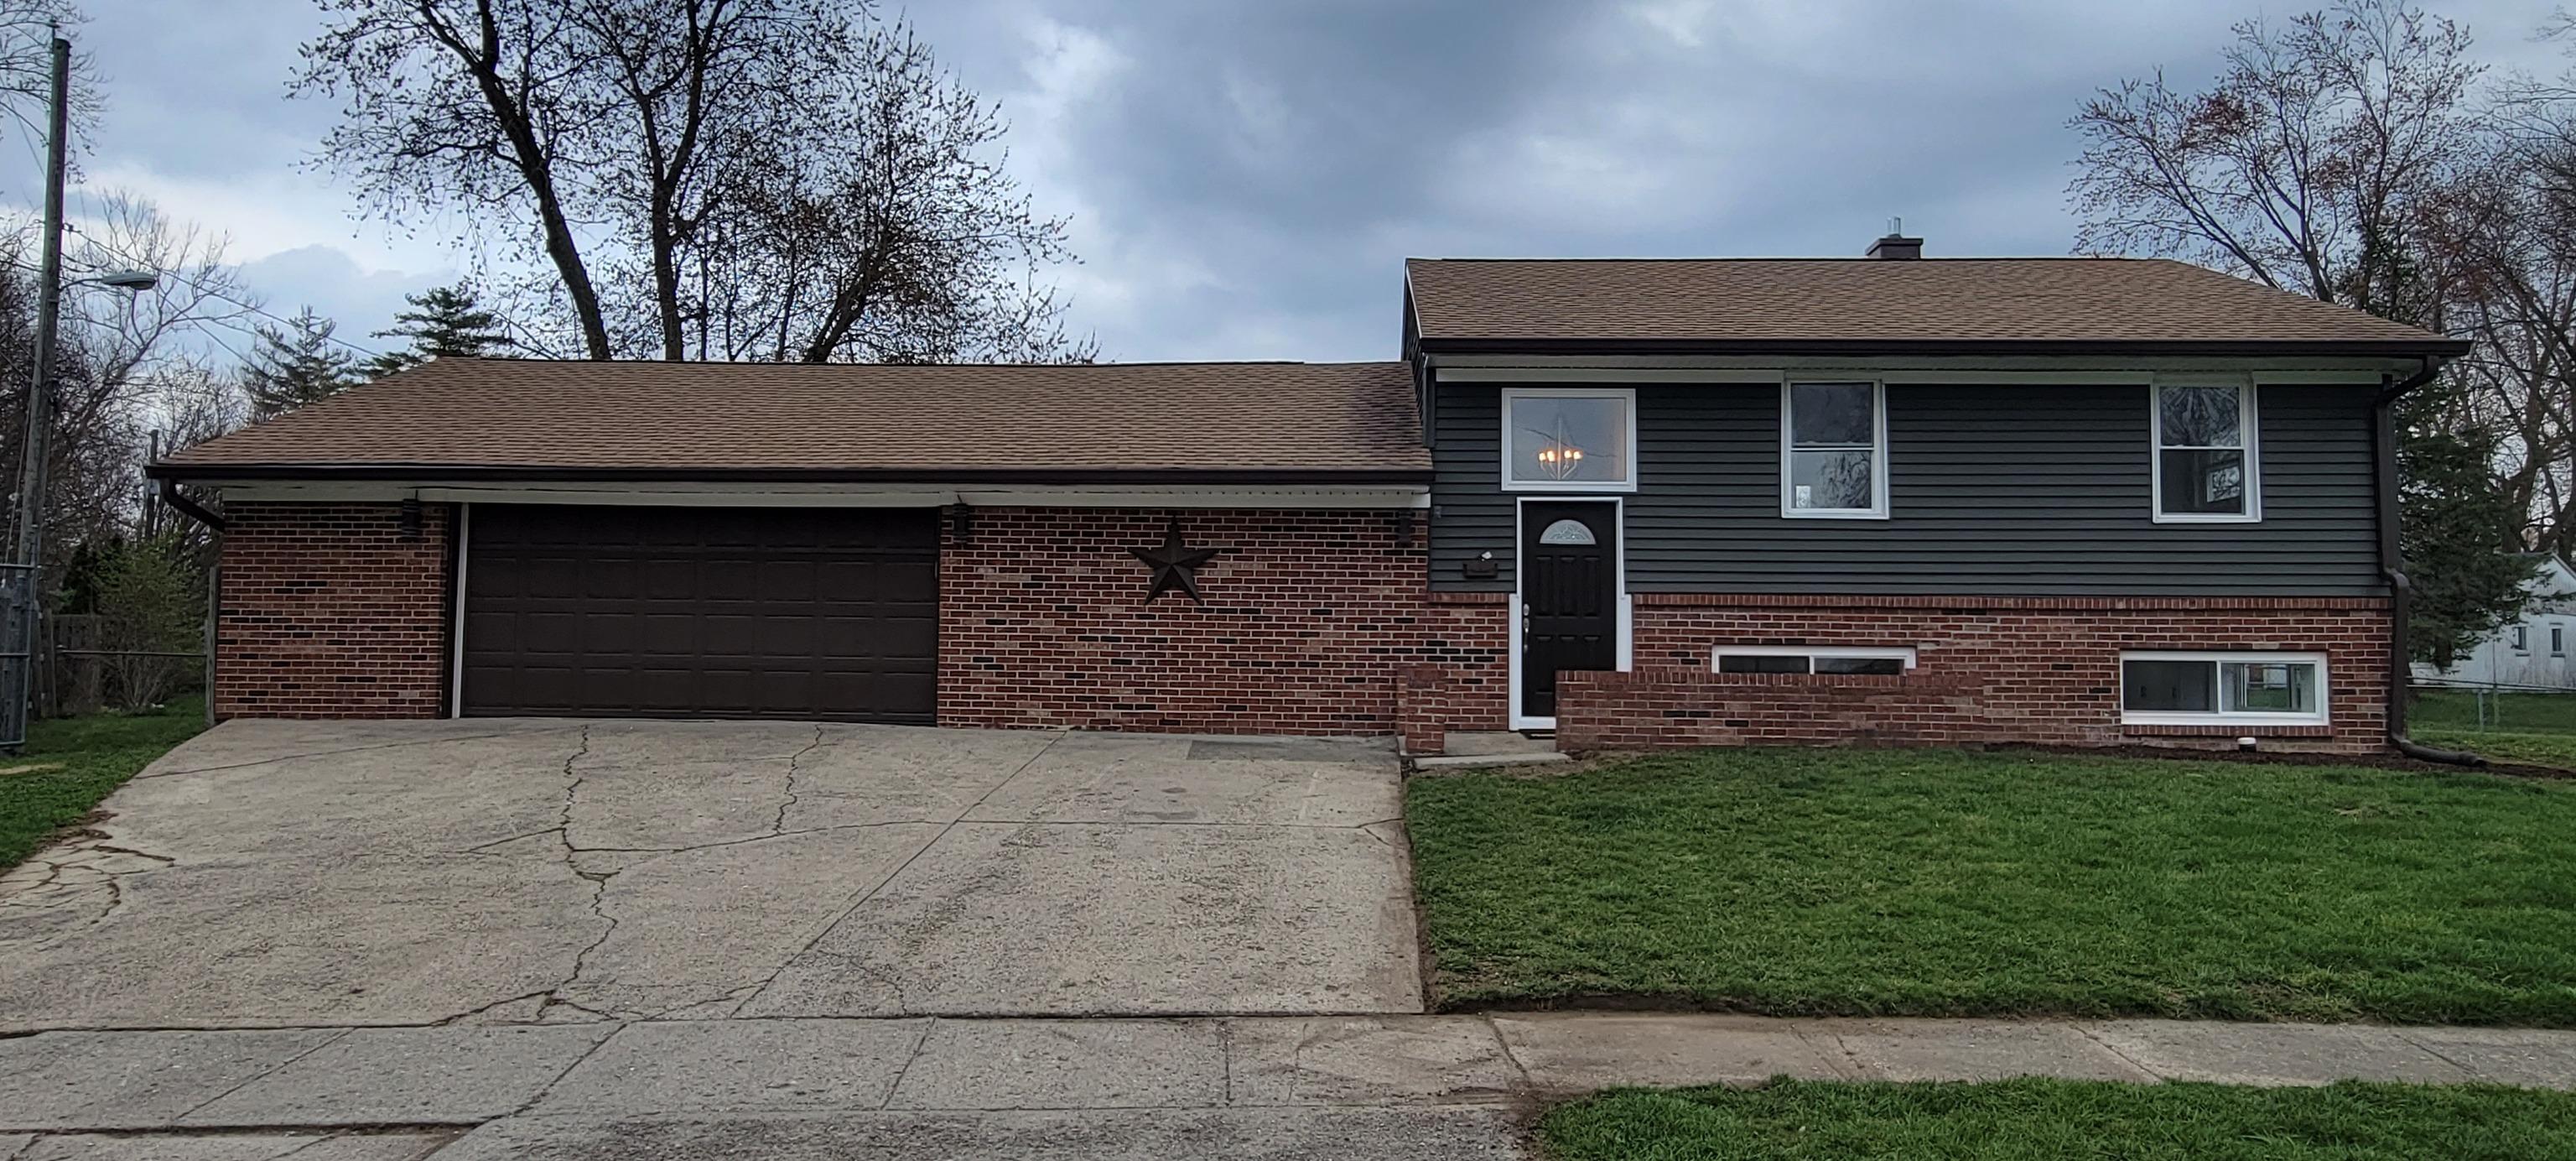 Photo one of 3545 N Galeston Ave Indianapolis IN 46235 | MLS 21971876